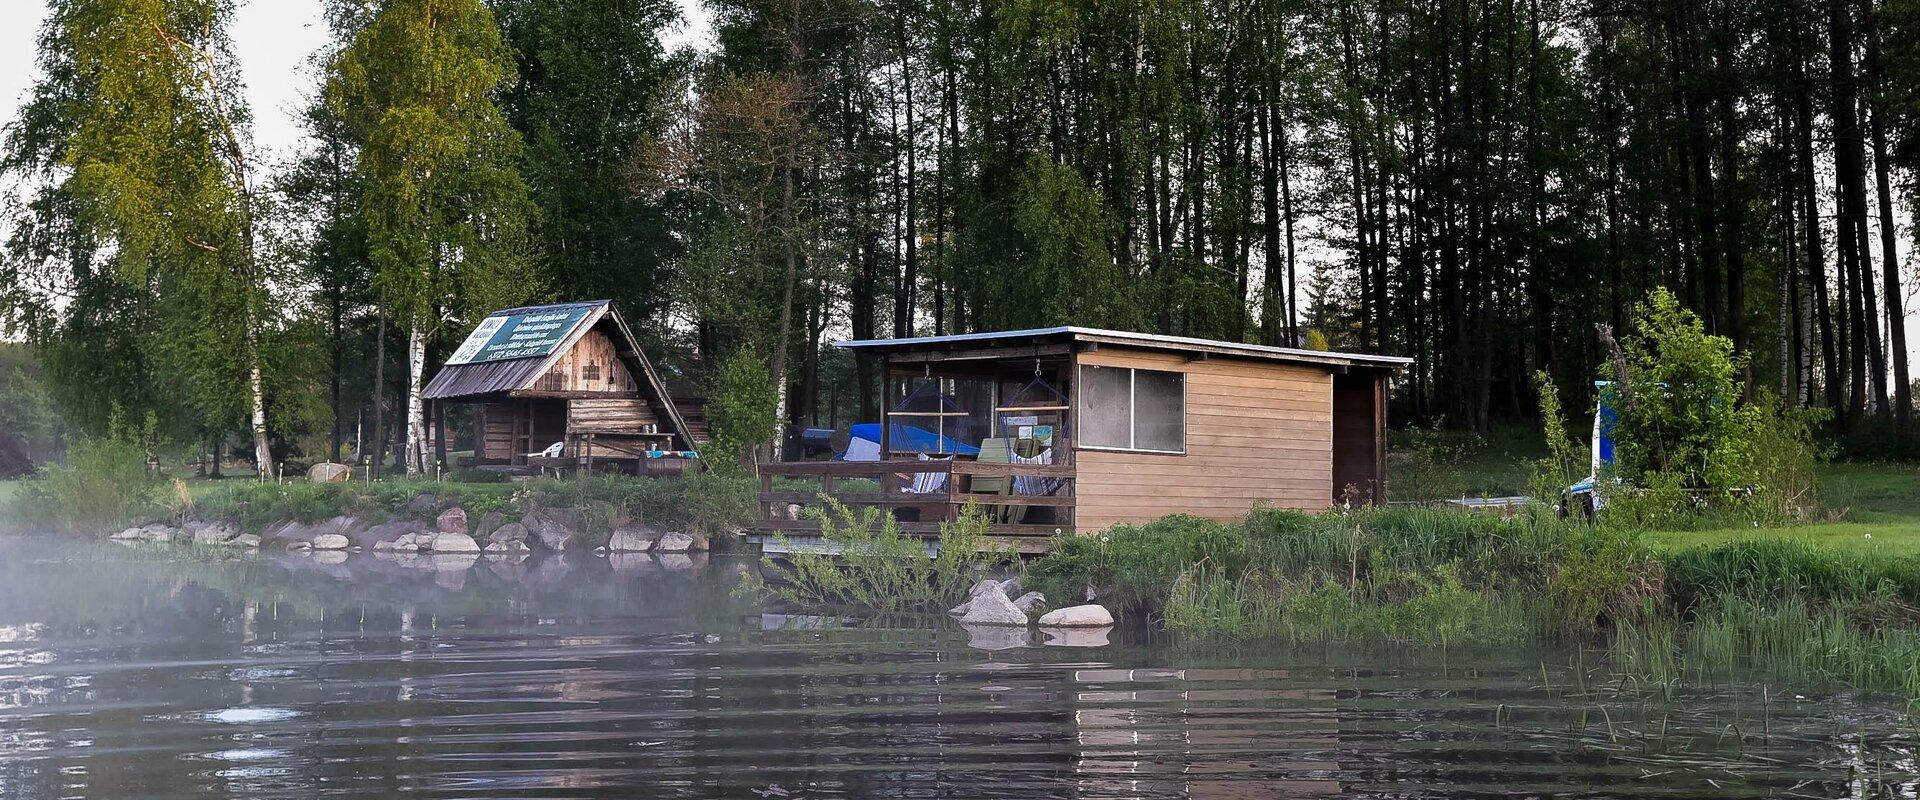 Humala Kalabaas - private and comfortable fishing spot with accommodation on the bank of the Emajõgi River